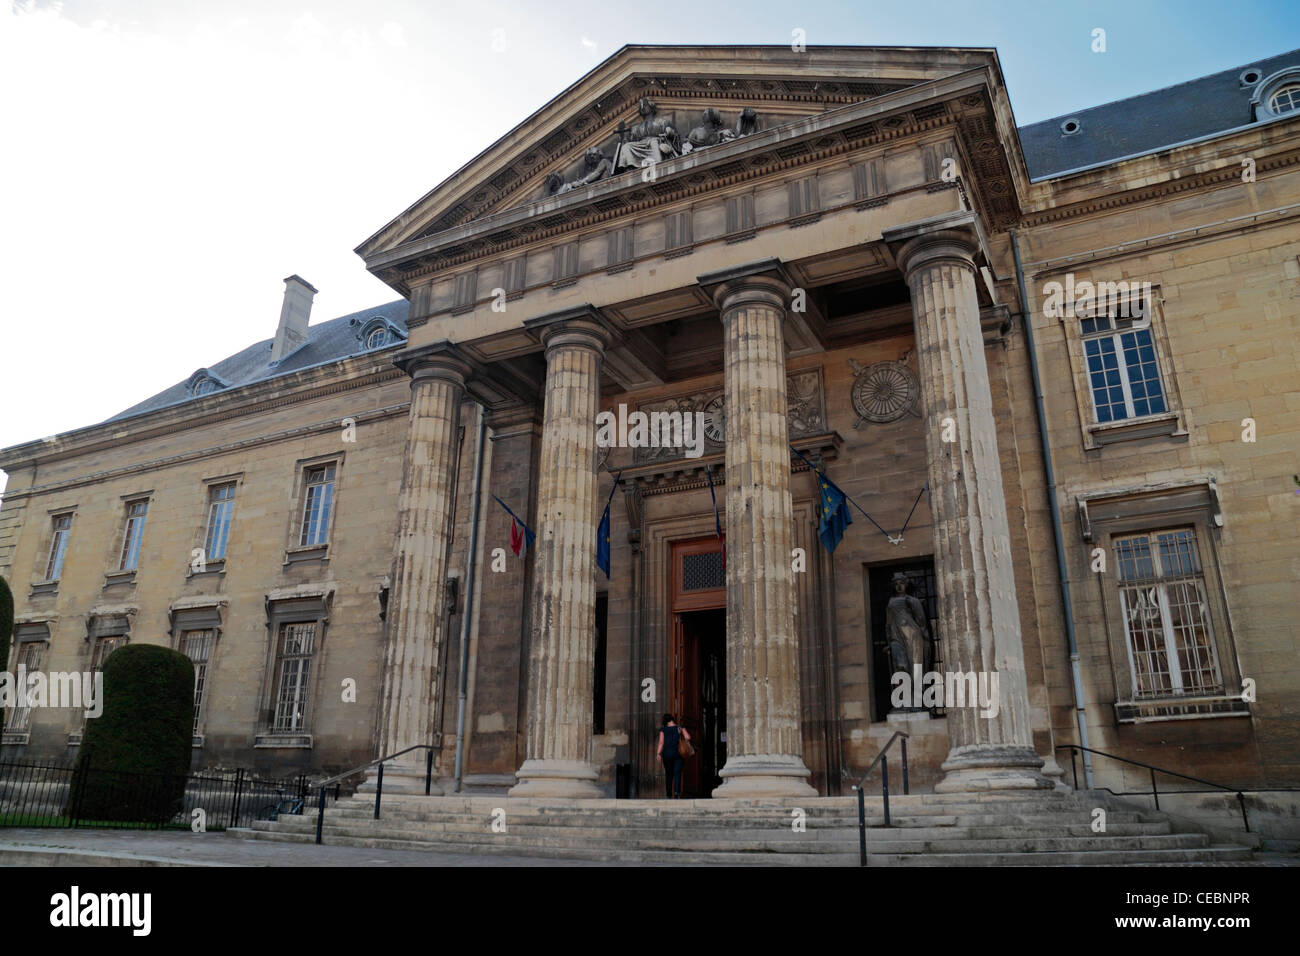 Palais de Justice (Justizpalast) in Reims, Champagne-Ardenne, Frankreich. Stockfoto